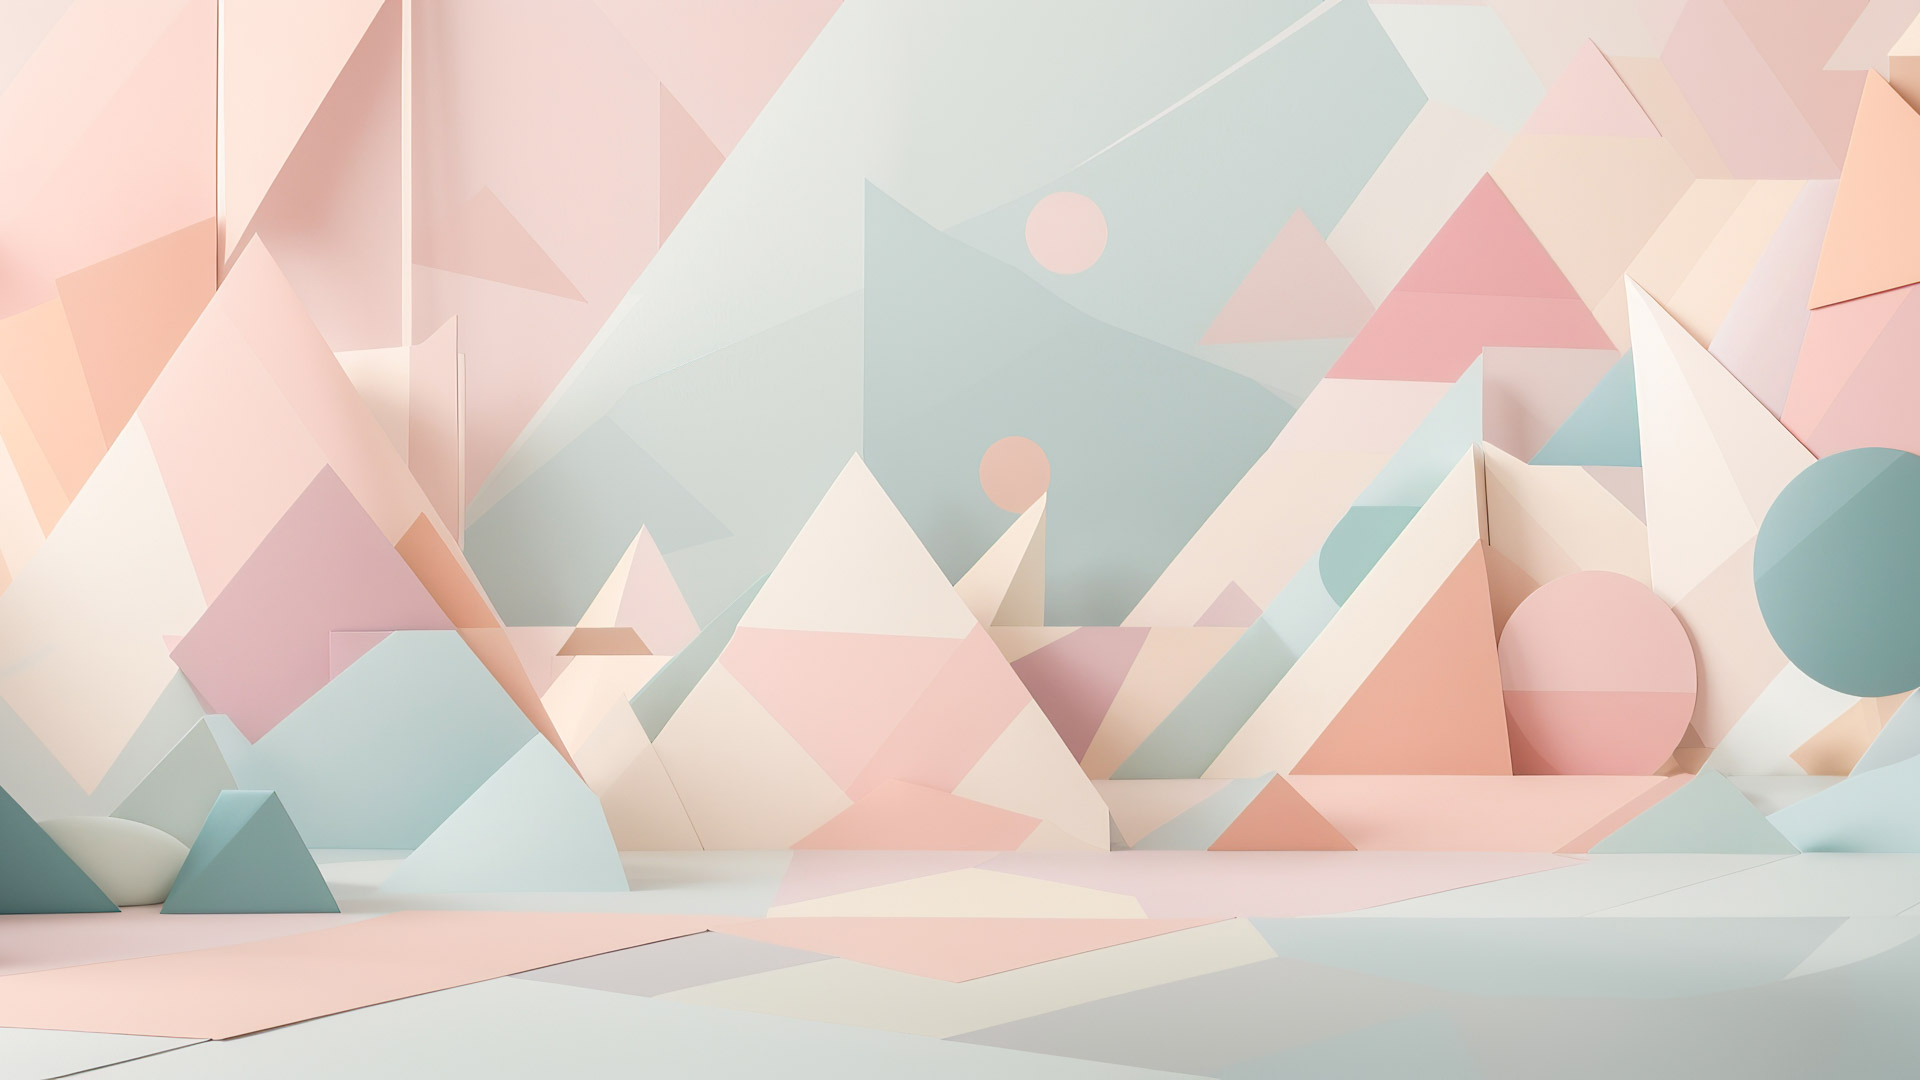 Transform your digital space with abstract art wallpaper HD, a serene and modern aesthetic blending soft pastels and geometric shapes.